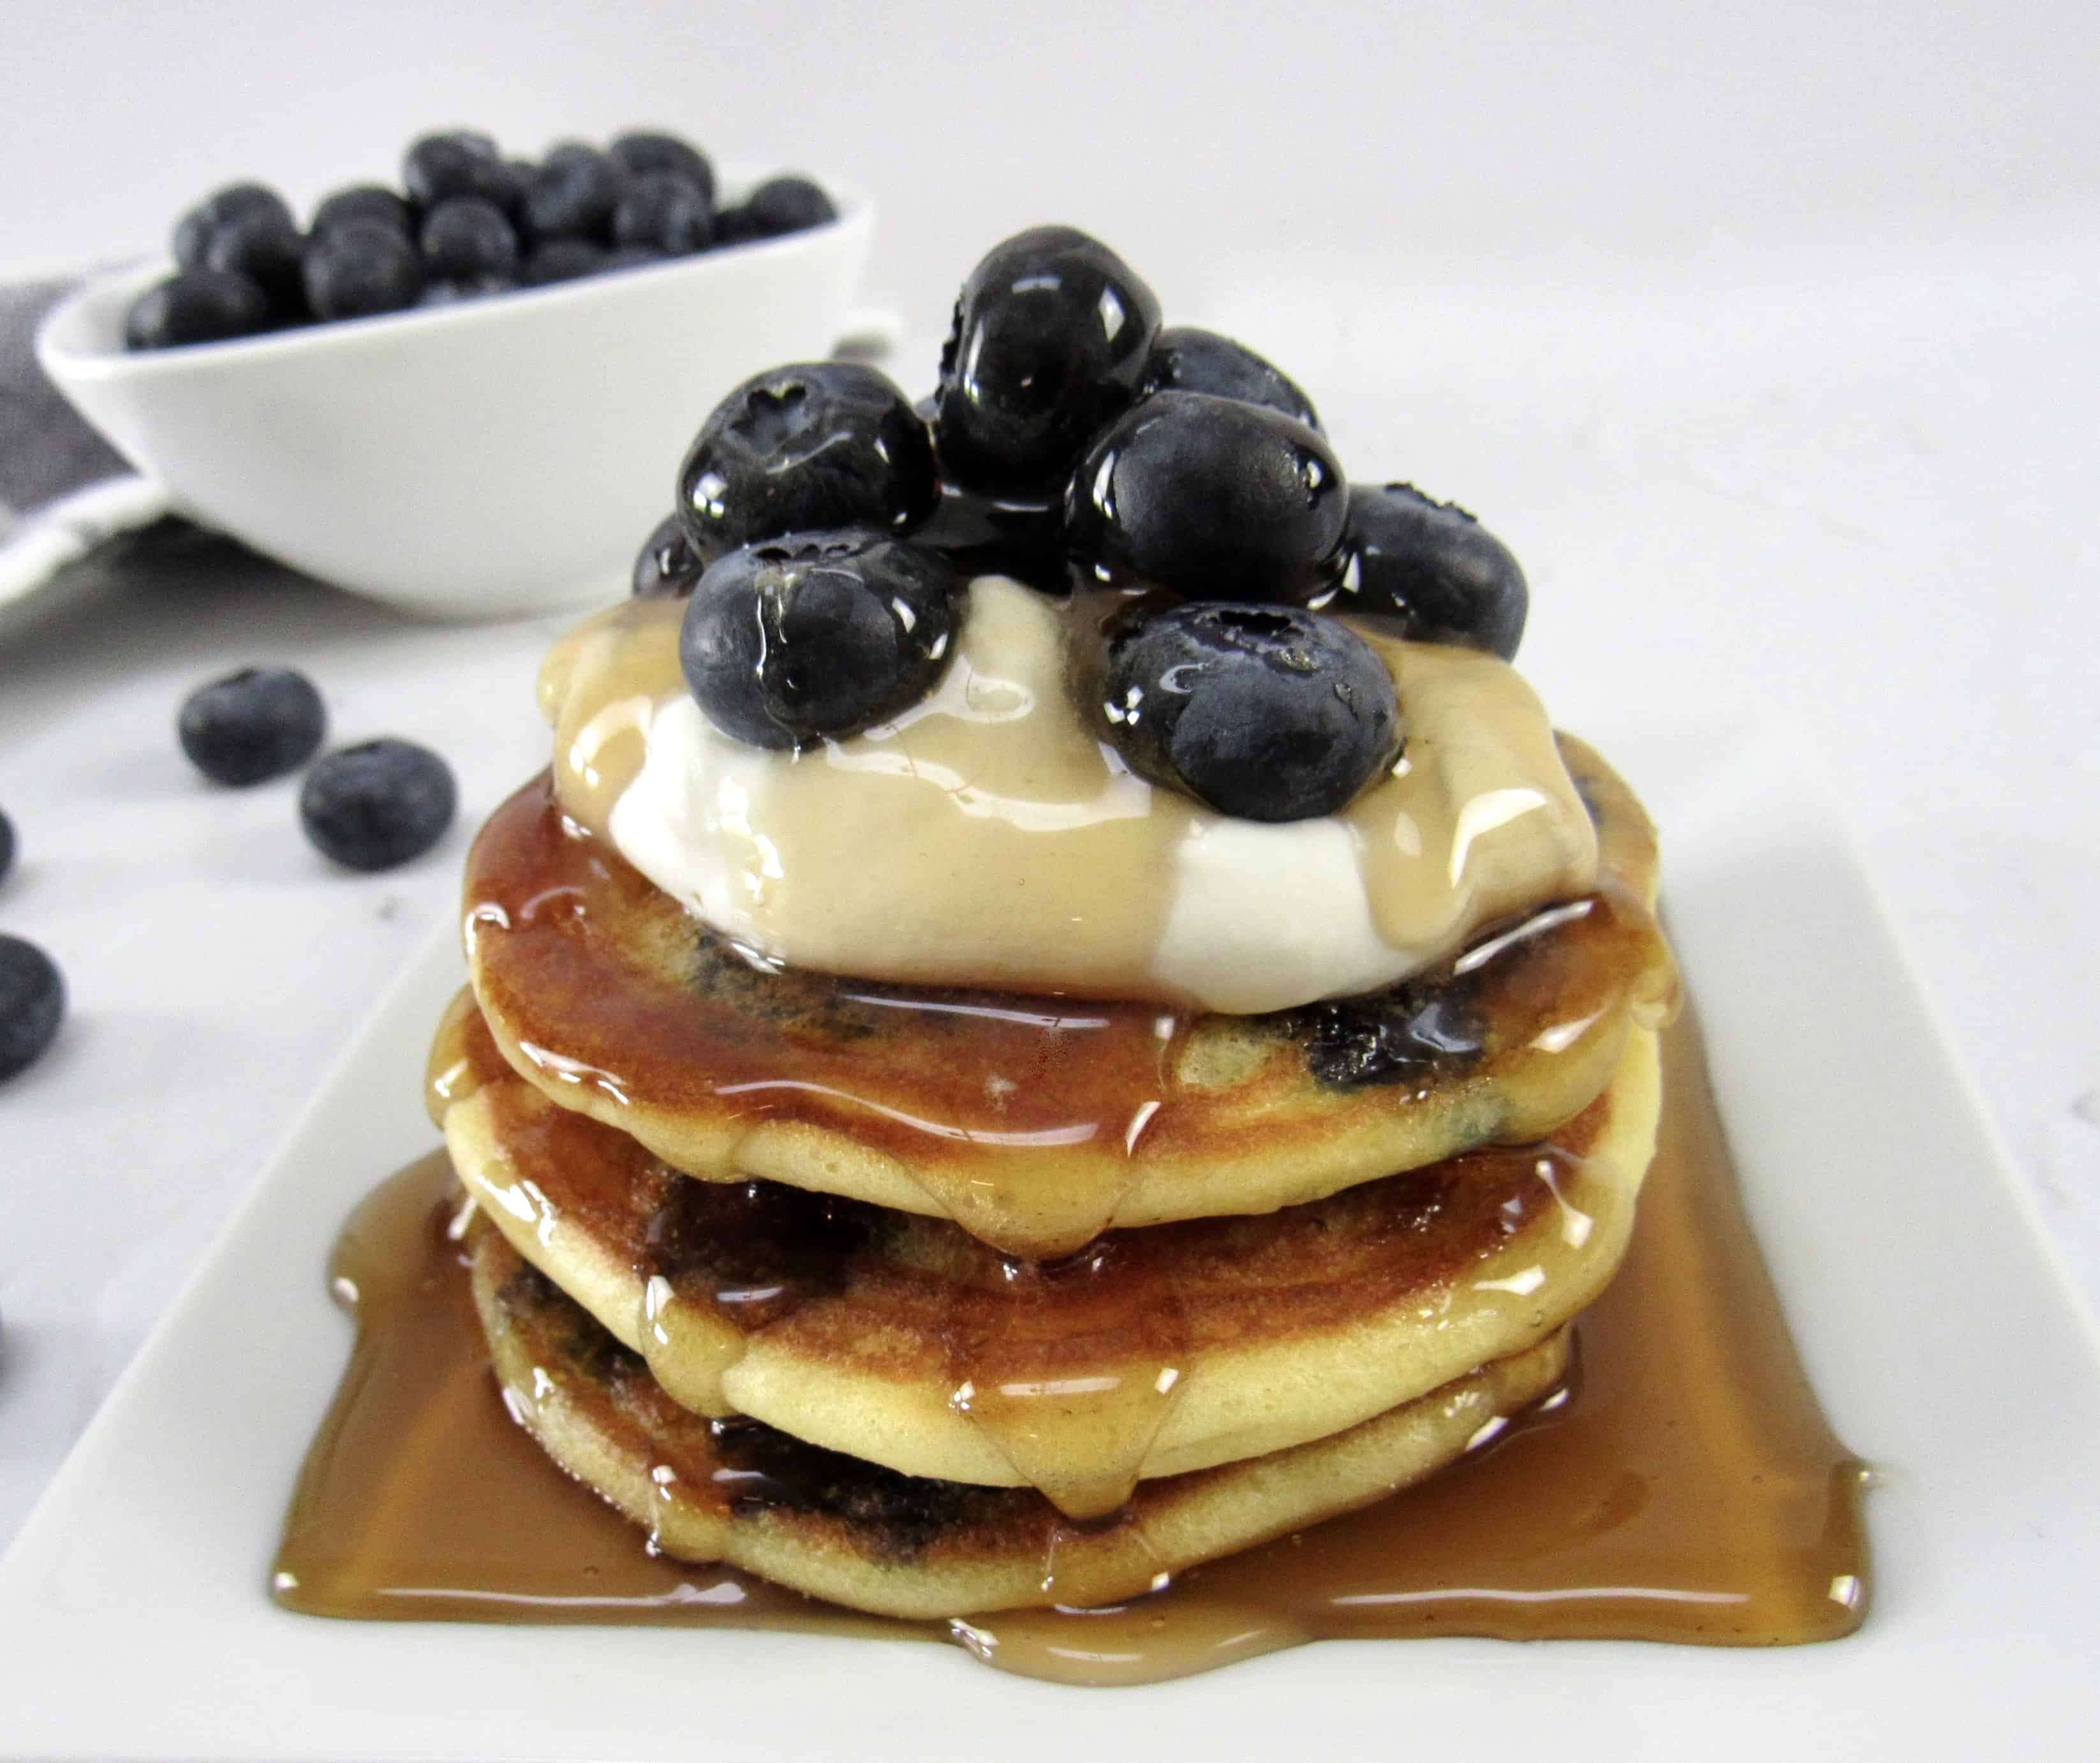 blueberry pancakes with syrup and blueberries on top